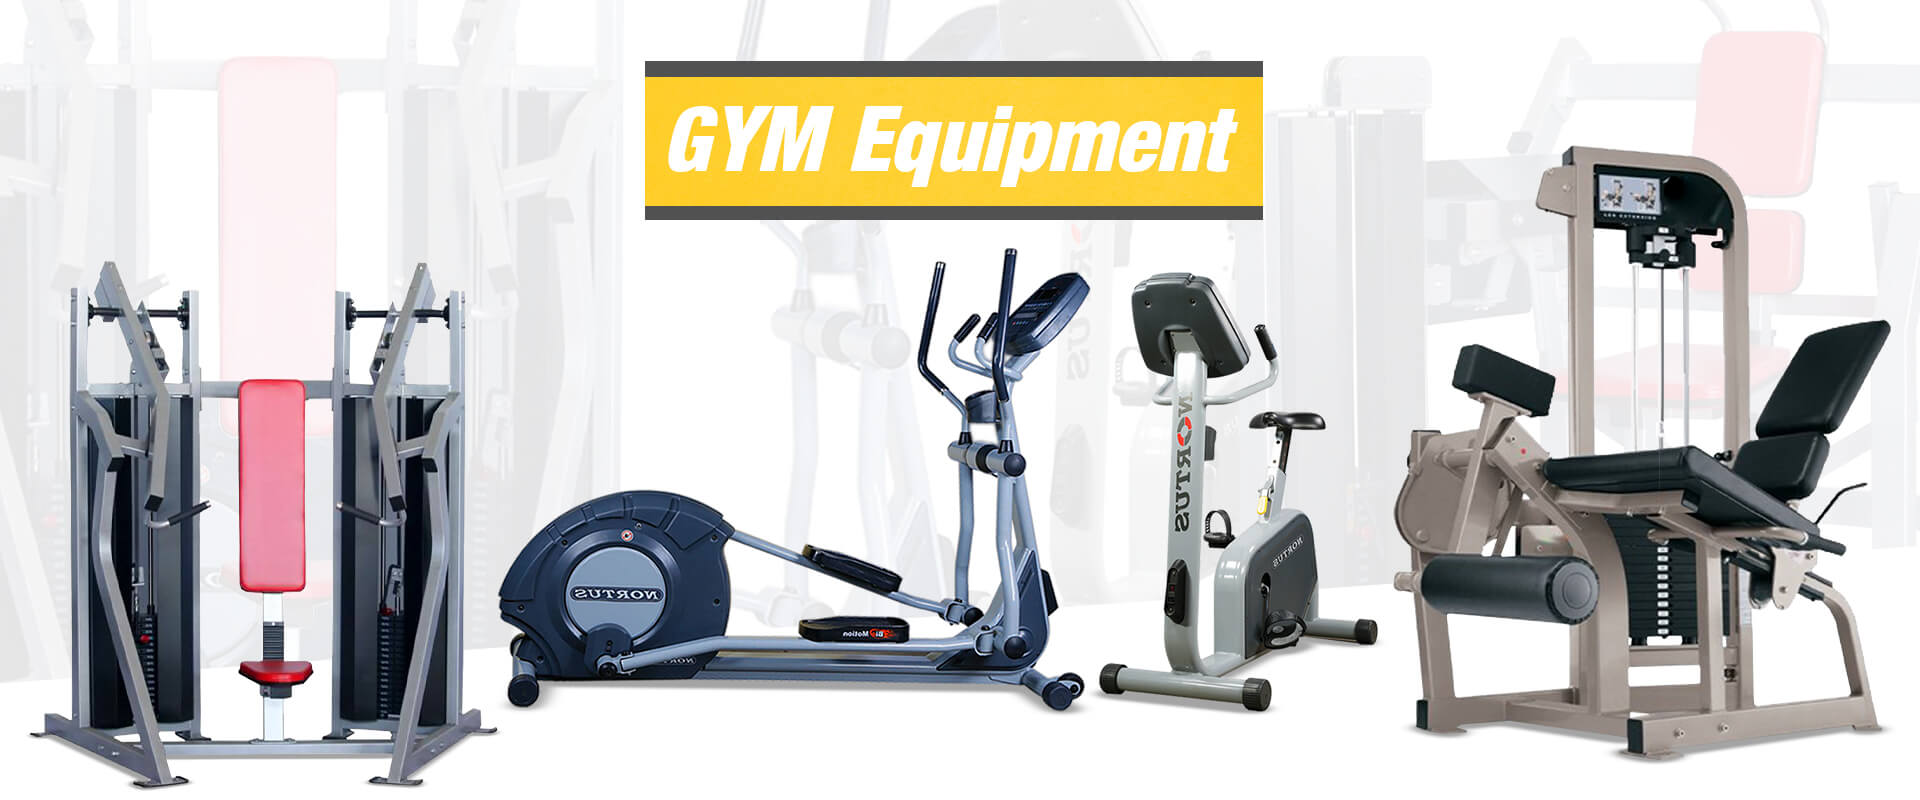 Why Is Nortus Fitness The Best Gym Equipment Manufacturer?